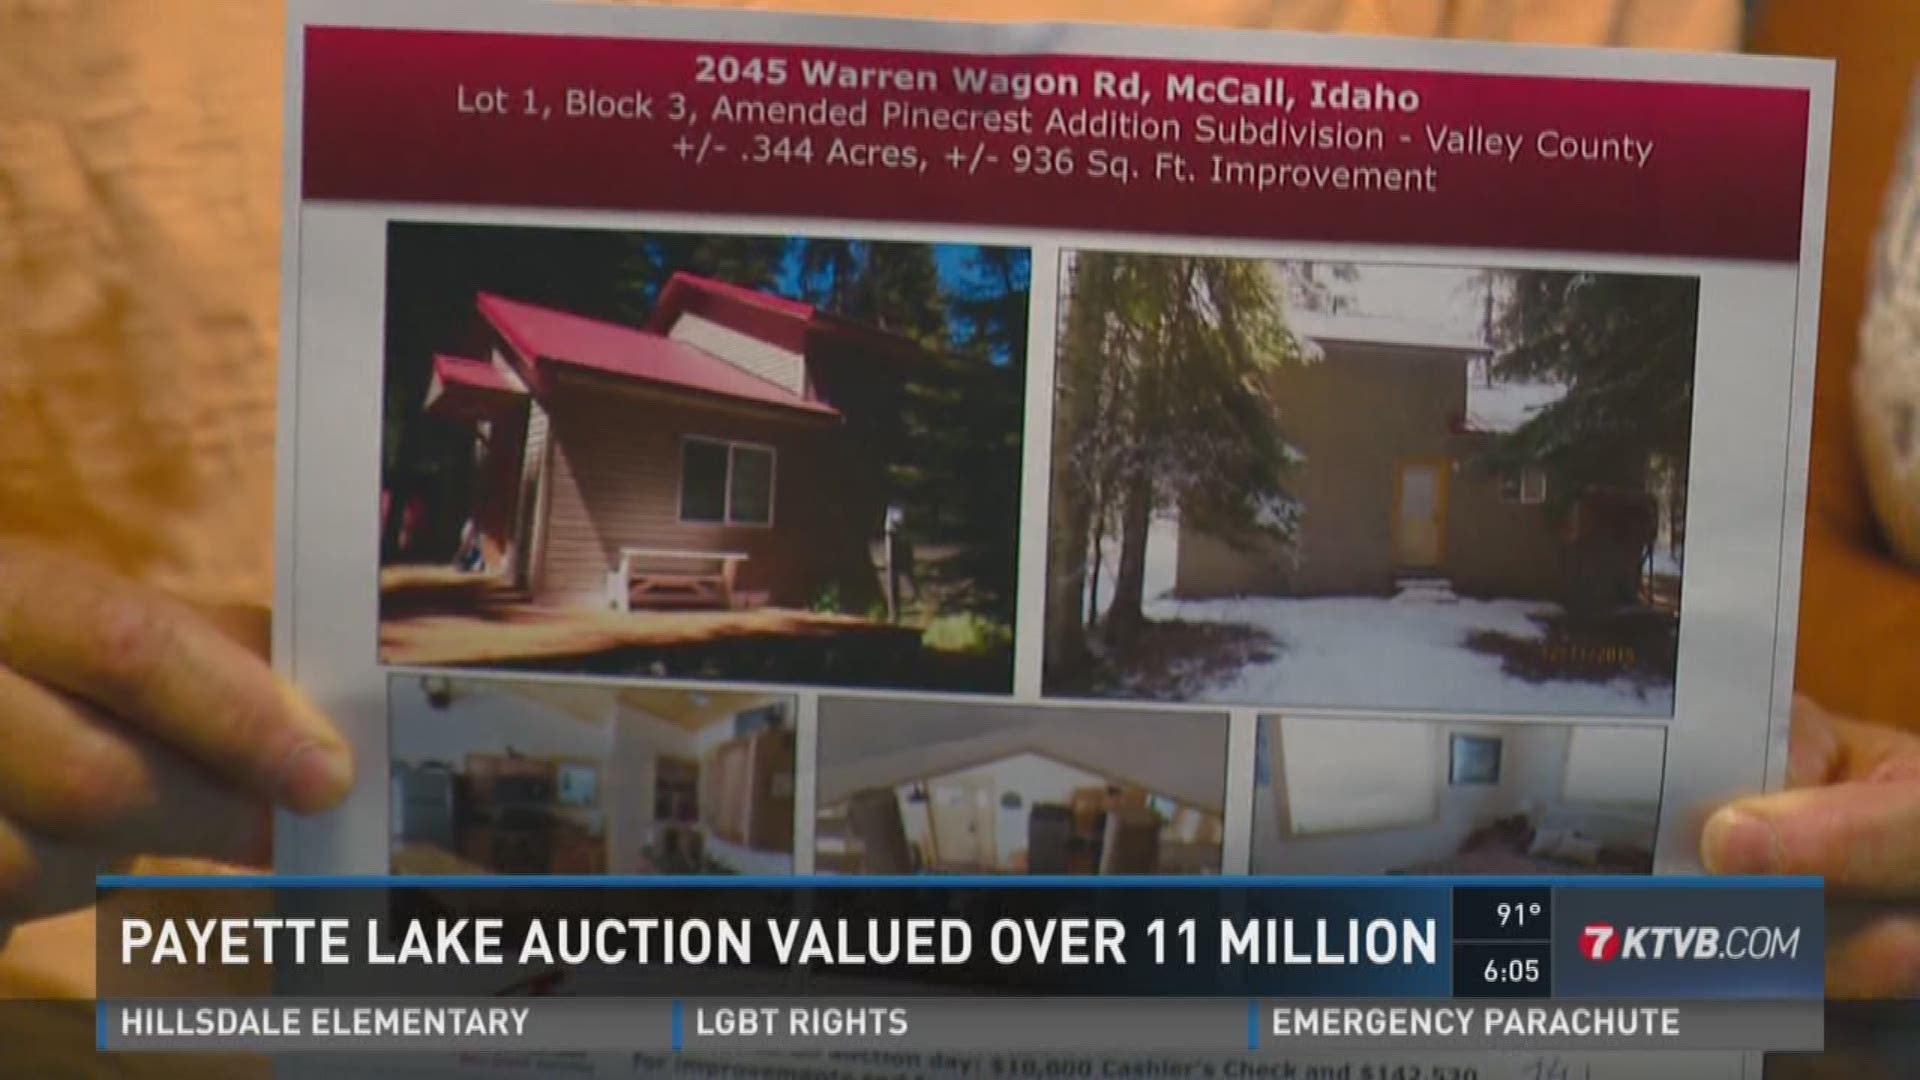 The lots were valued at over $11 million.